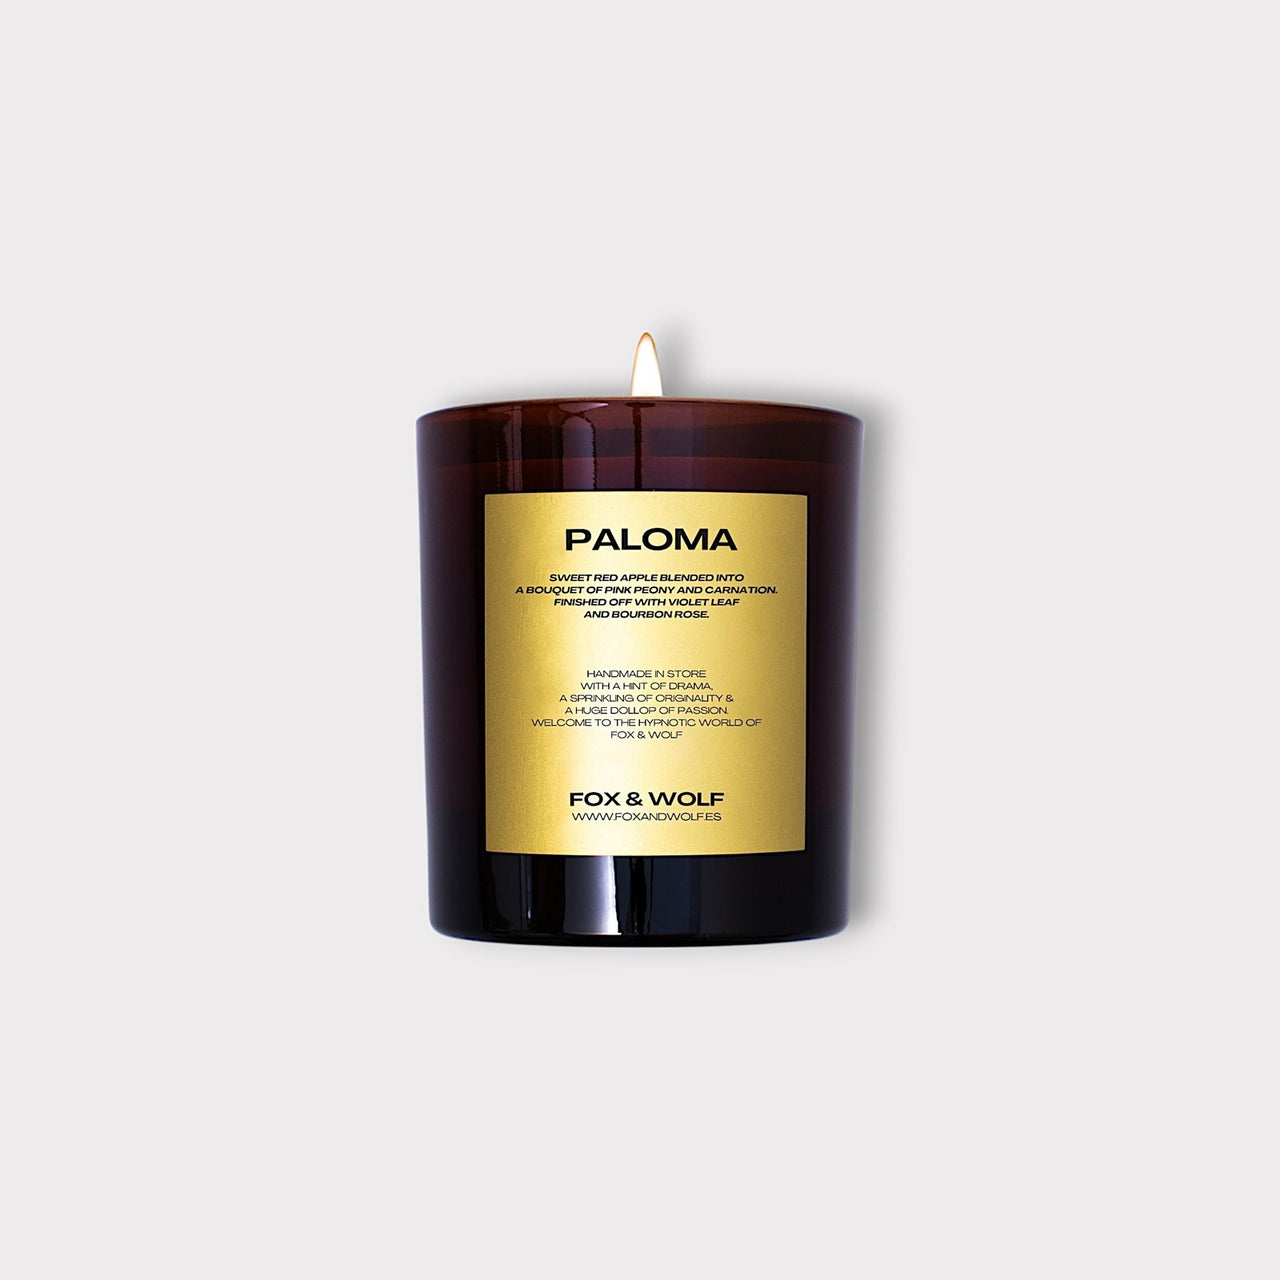 300 G PALOMA SCENTED CANDLE